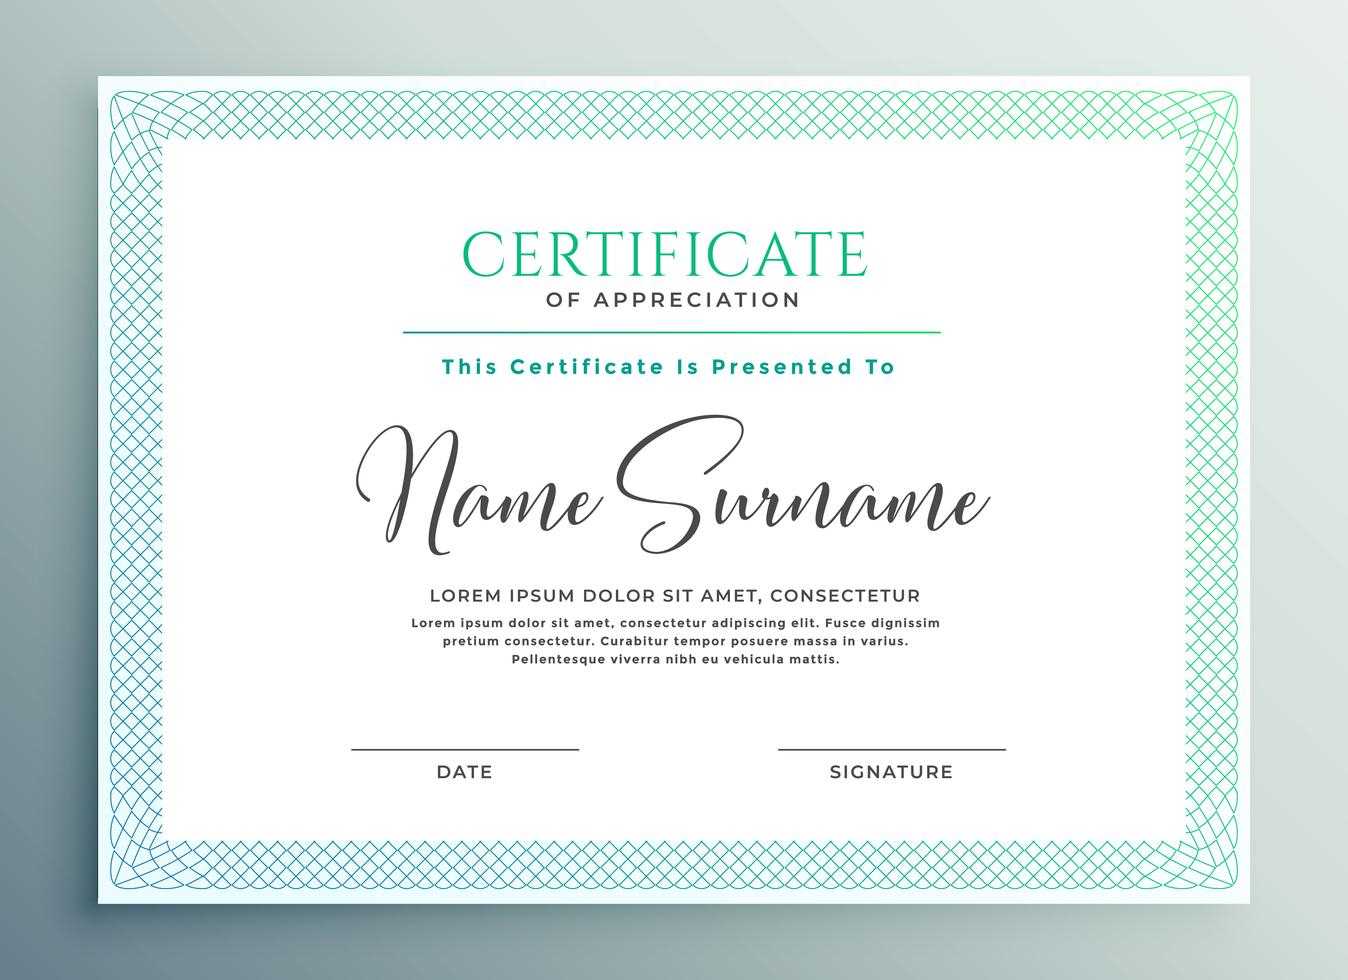 30+ Certificate Of Appreciation Download!! | Templates Study Within Gratitude Certificate Template